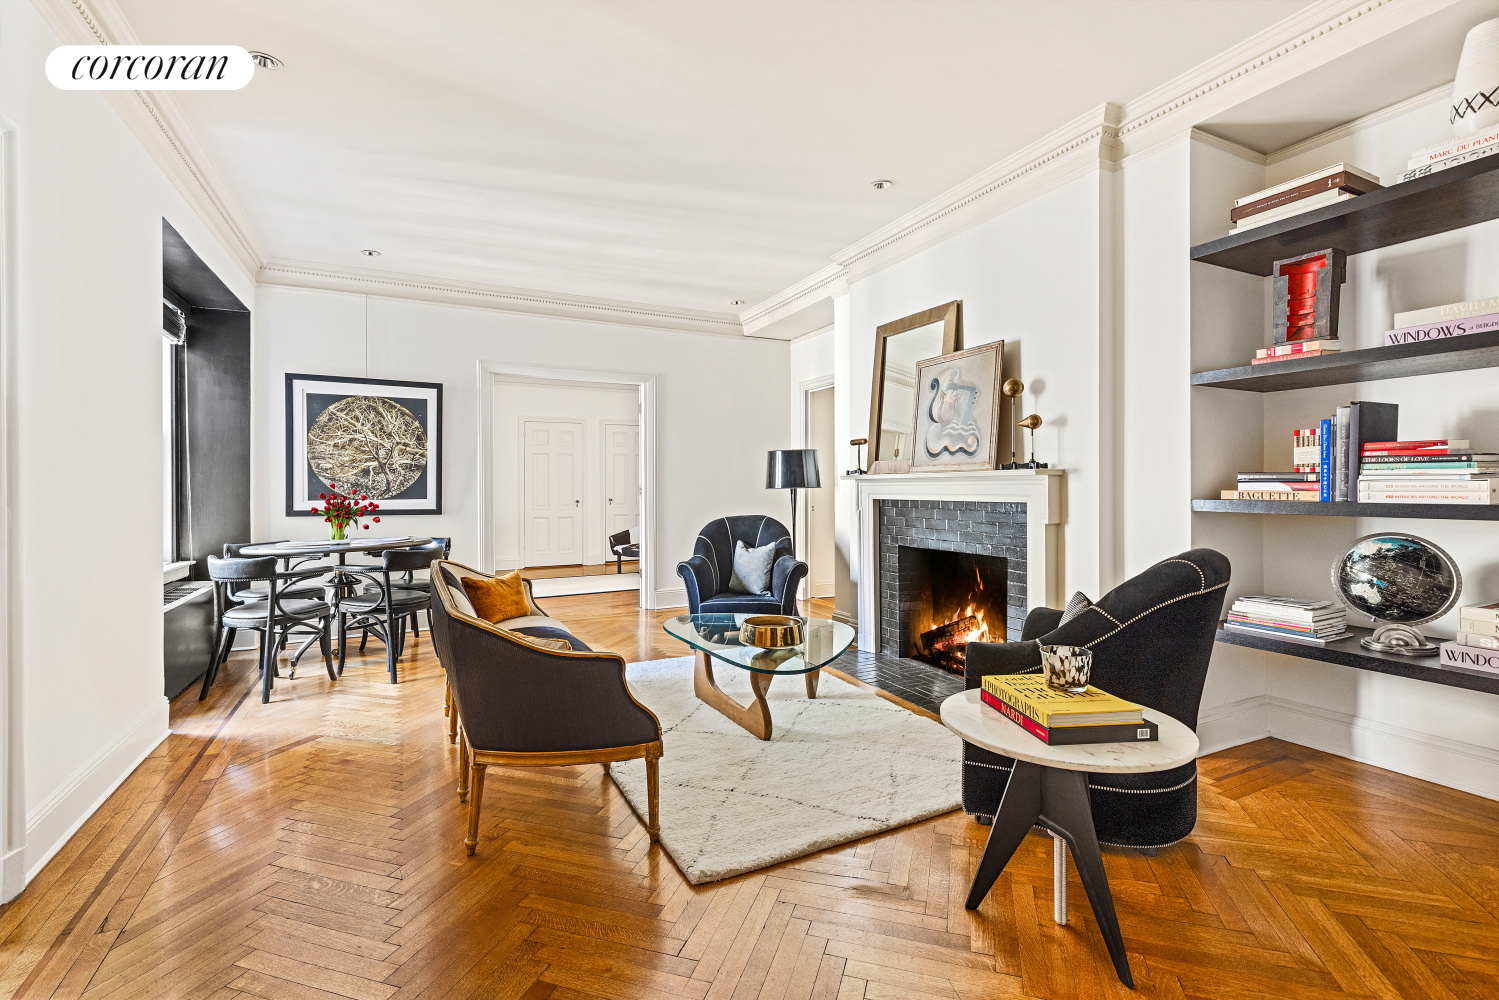 14 Sutton Place 10, Sutton, Midtown East, NYC - 2 Bedrooms  
2 Bathrooms  
5 Rooms - 